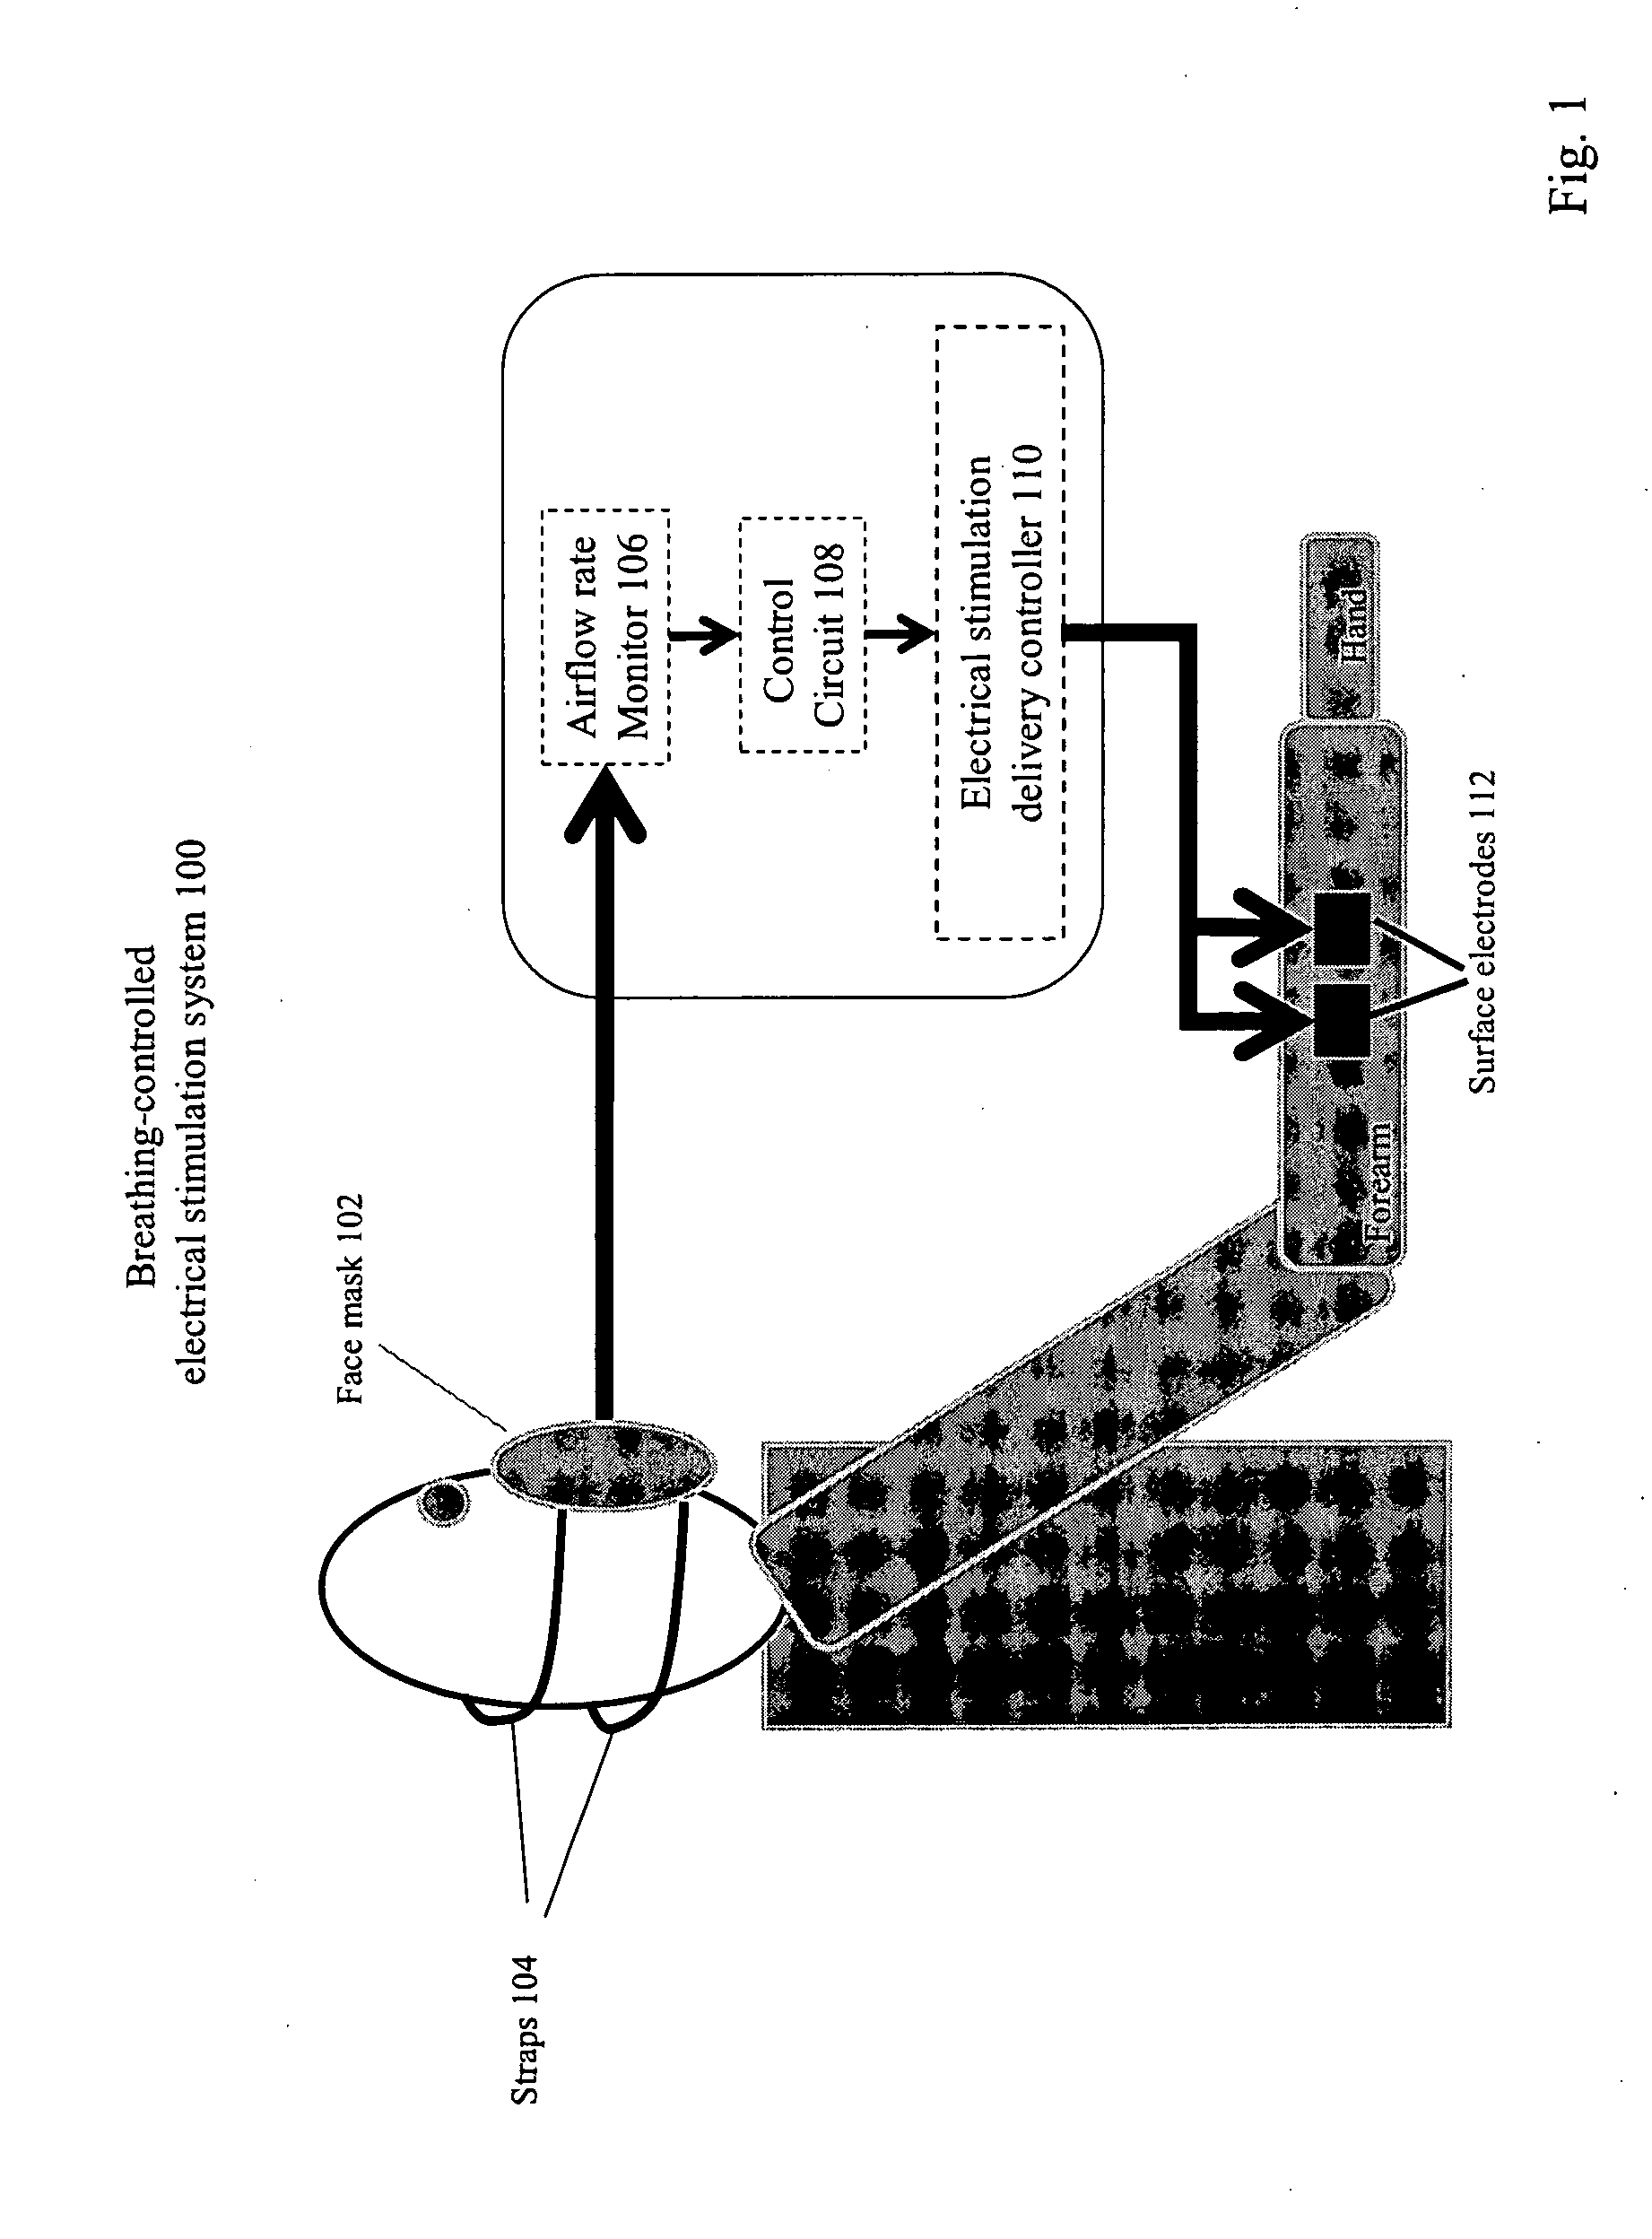 Method and Apparatus of Breathing-Controlled Electrical Stimulation for Skeletal Muscles